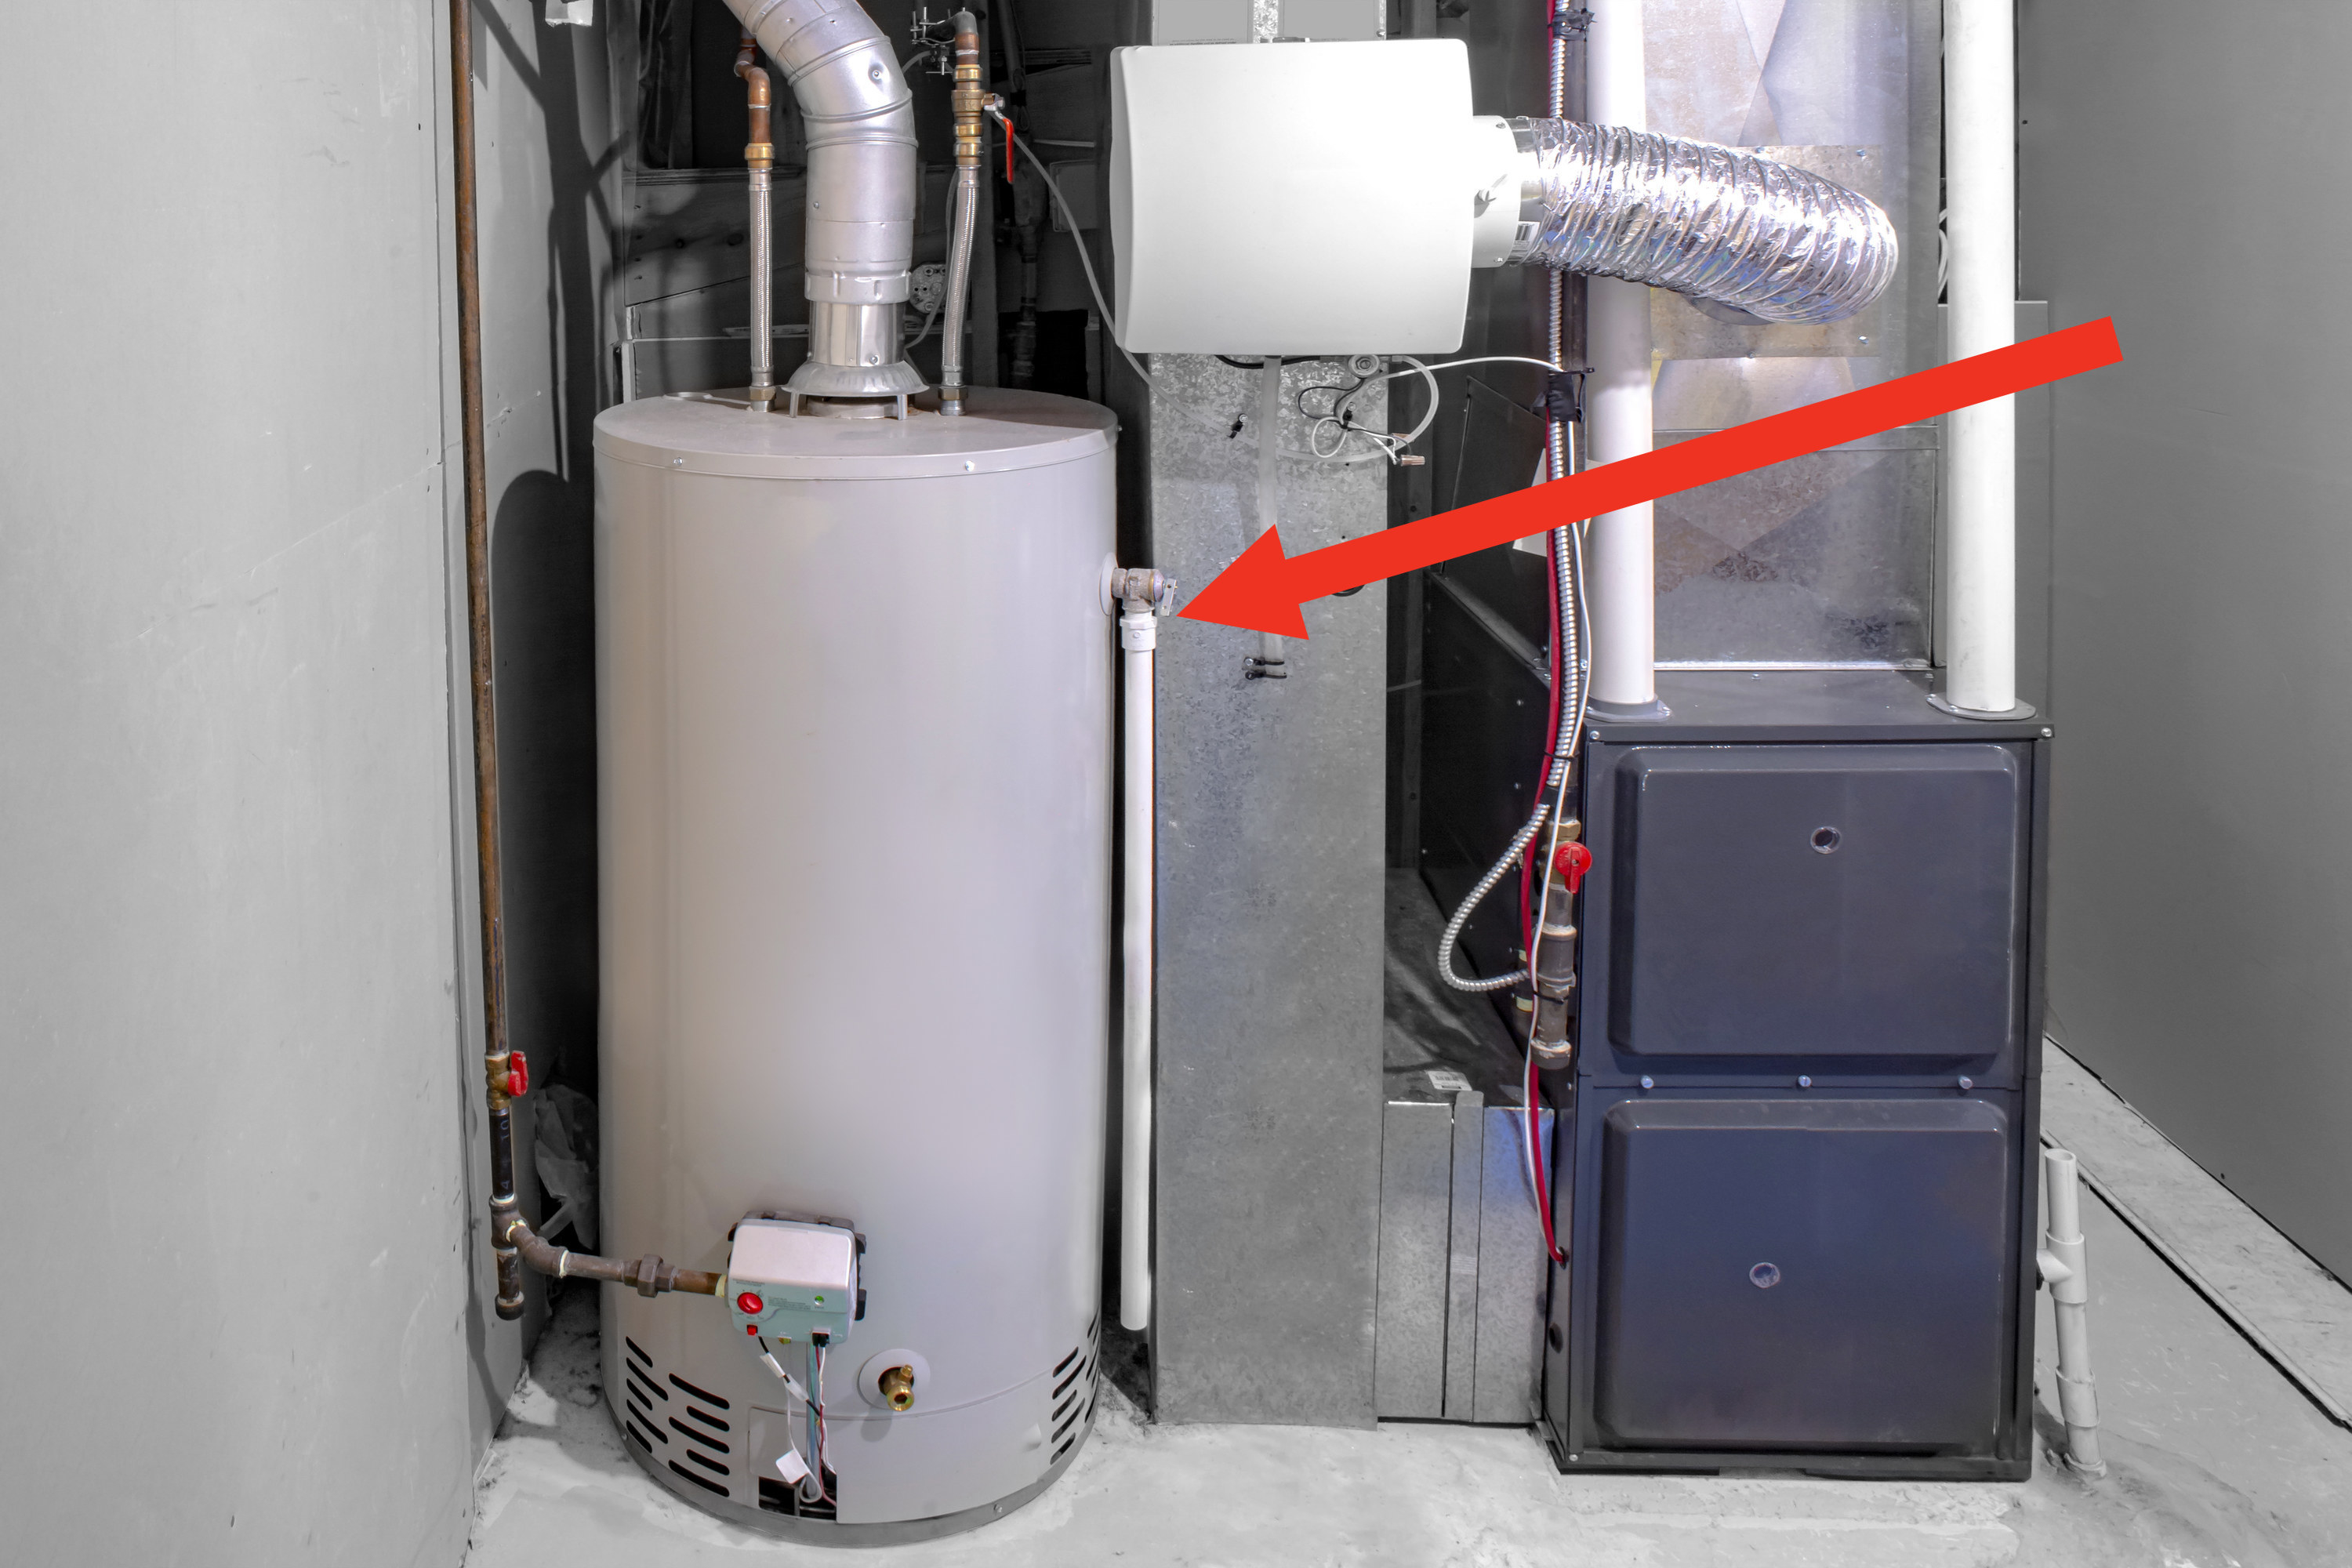 Arrow pointing to a large hot water heater